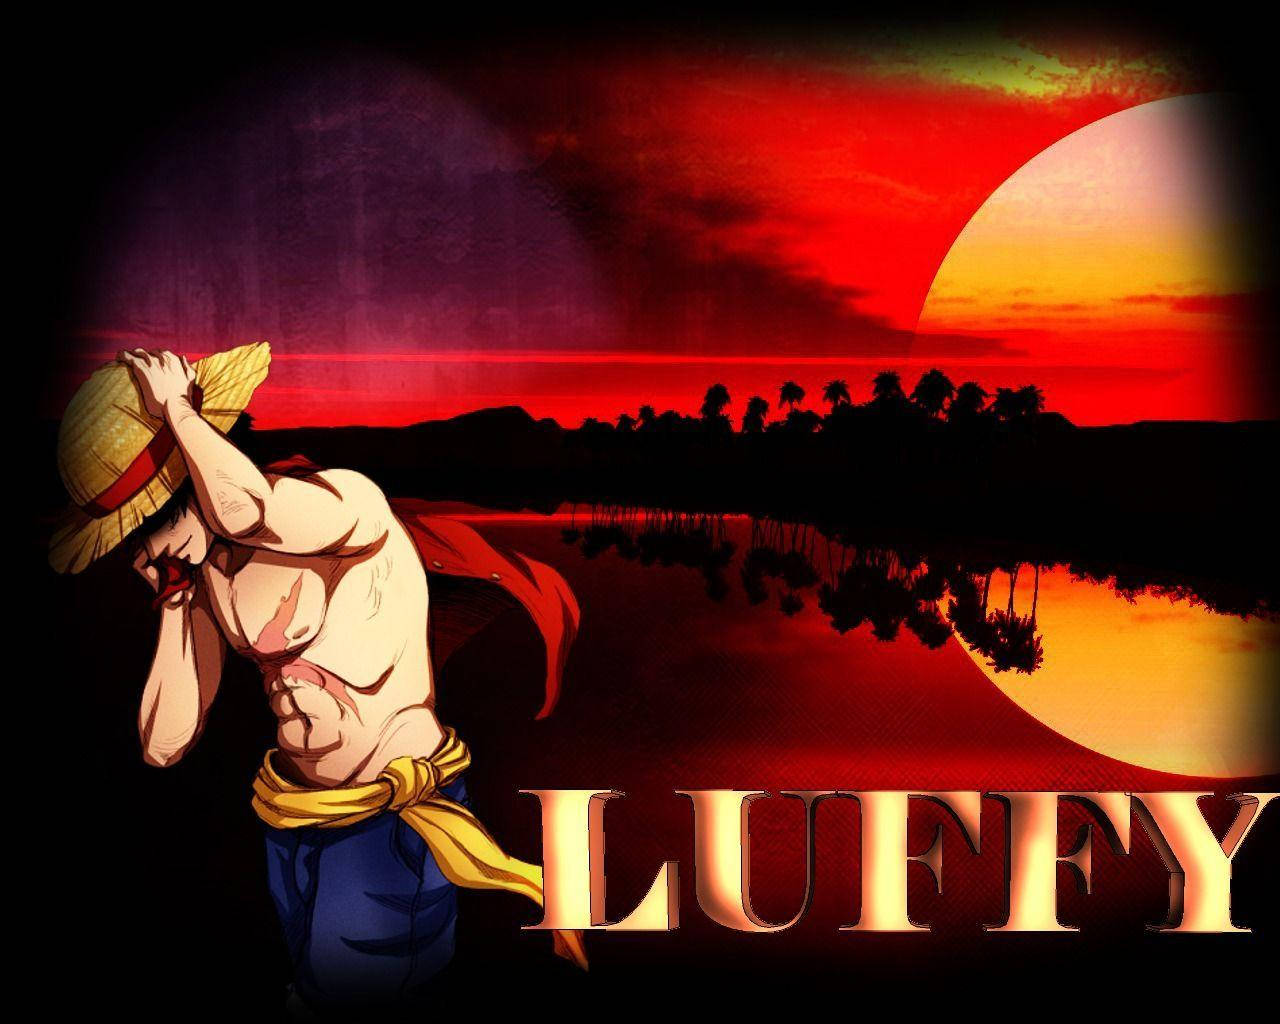 Luffy Red Sky Poster Background